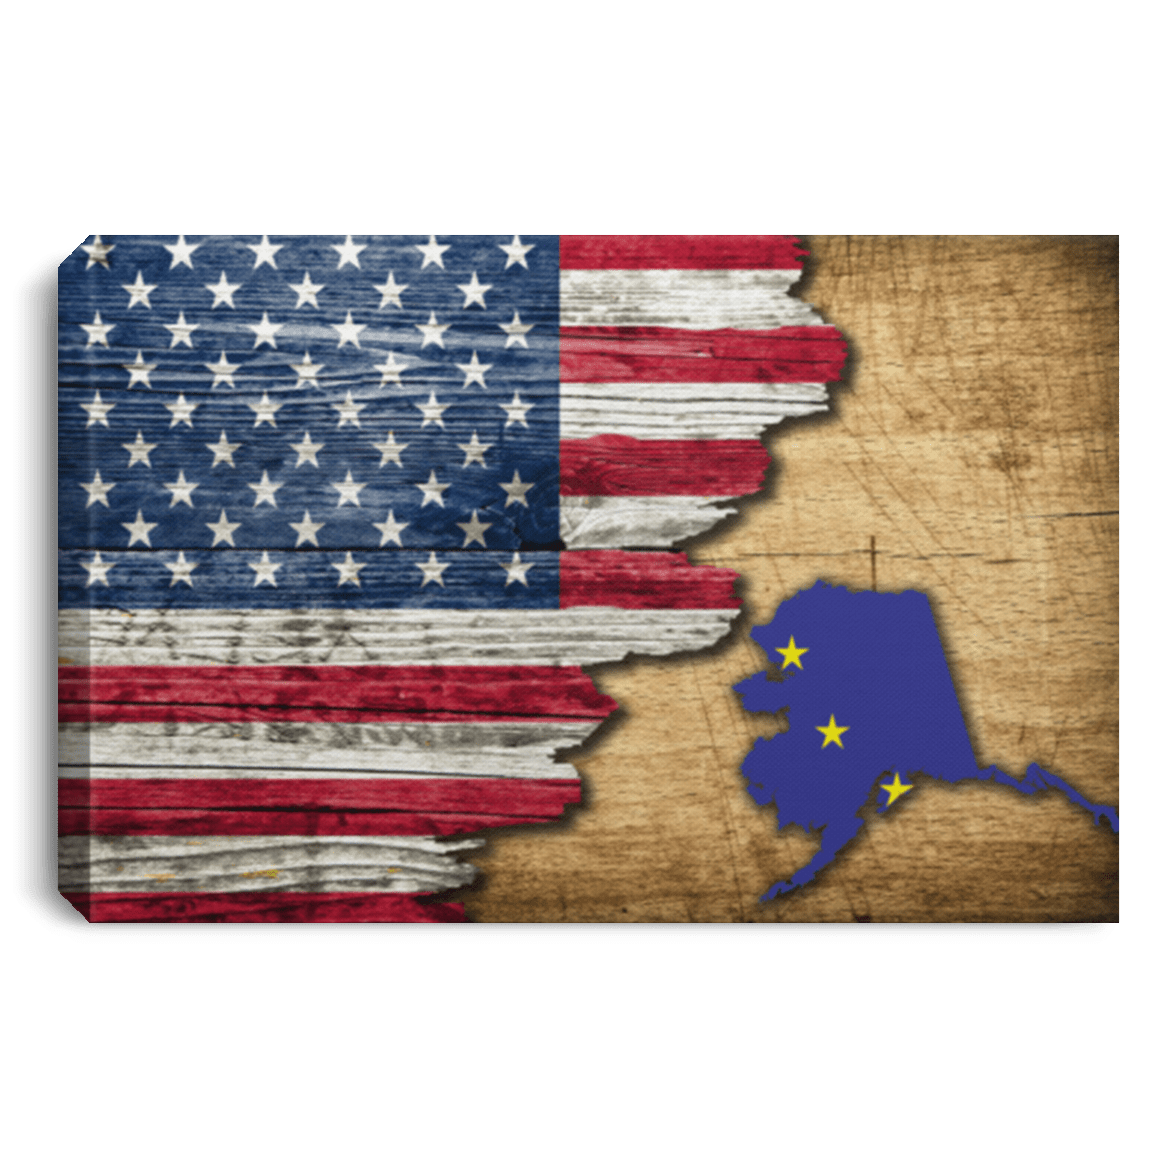 United States/Alaska Flag Ripped Effect 18X12 Inches Landscape Canvas .75In Frame